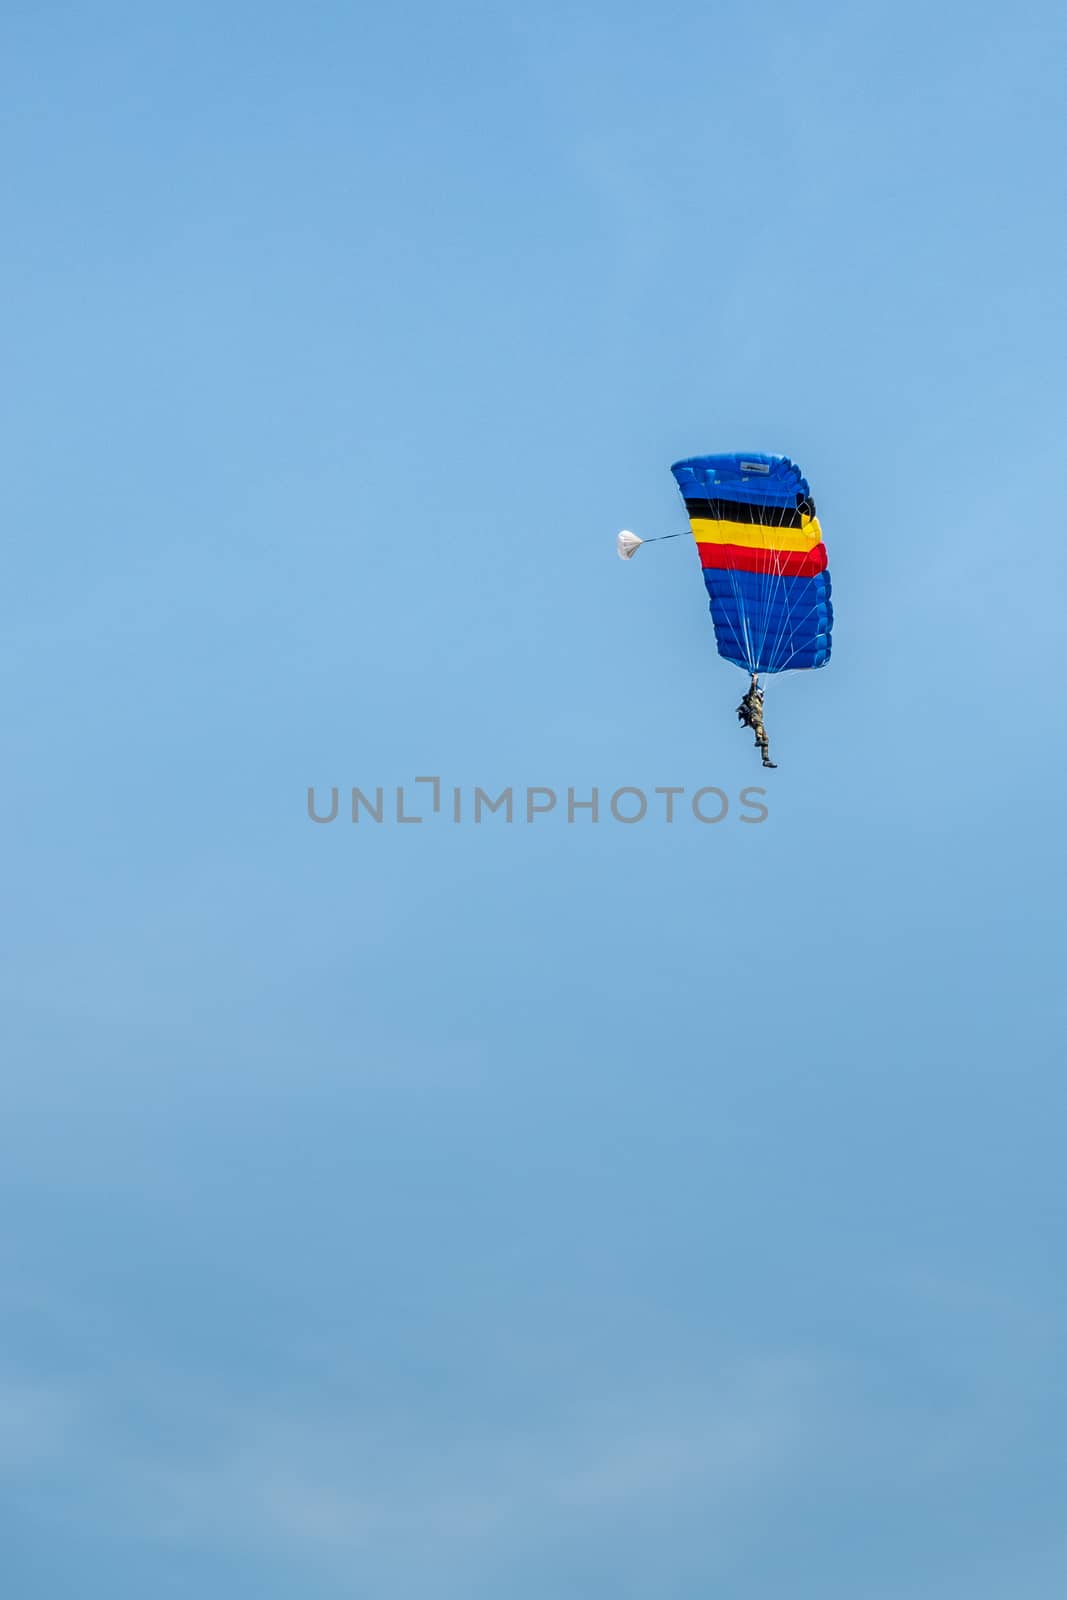 Belgian soldier on parachute in the air, Han-sur-lesse, Belgium. by Claudine